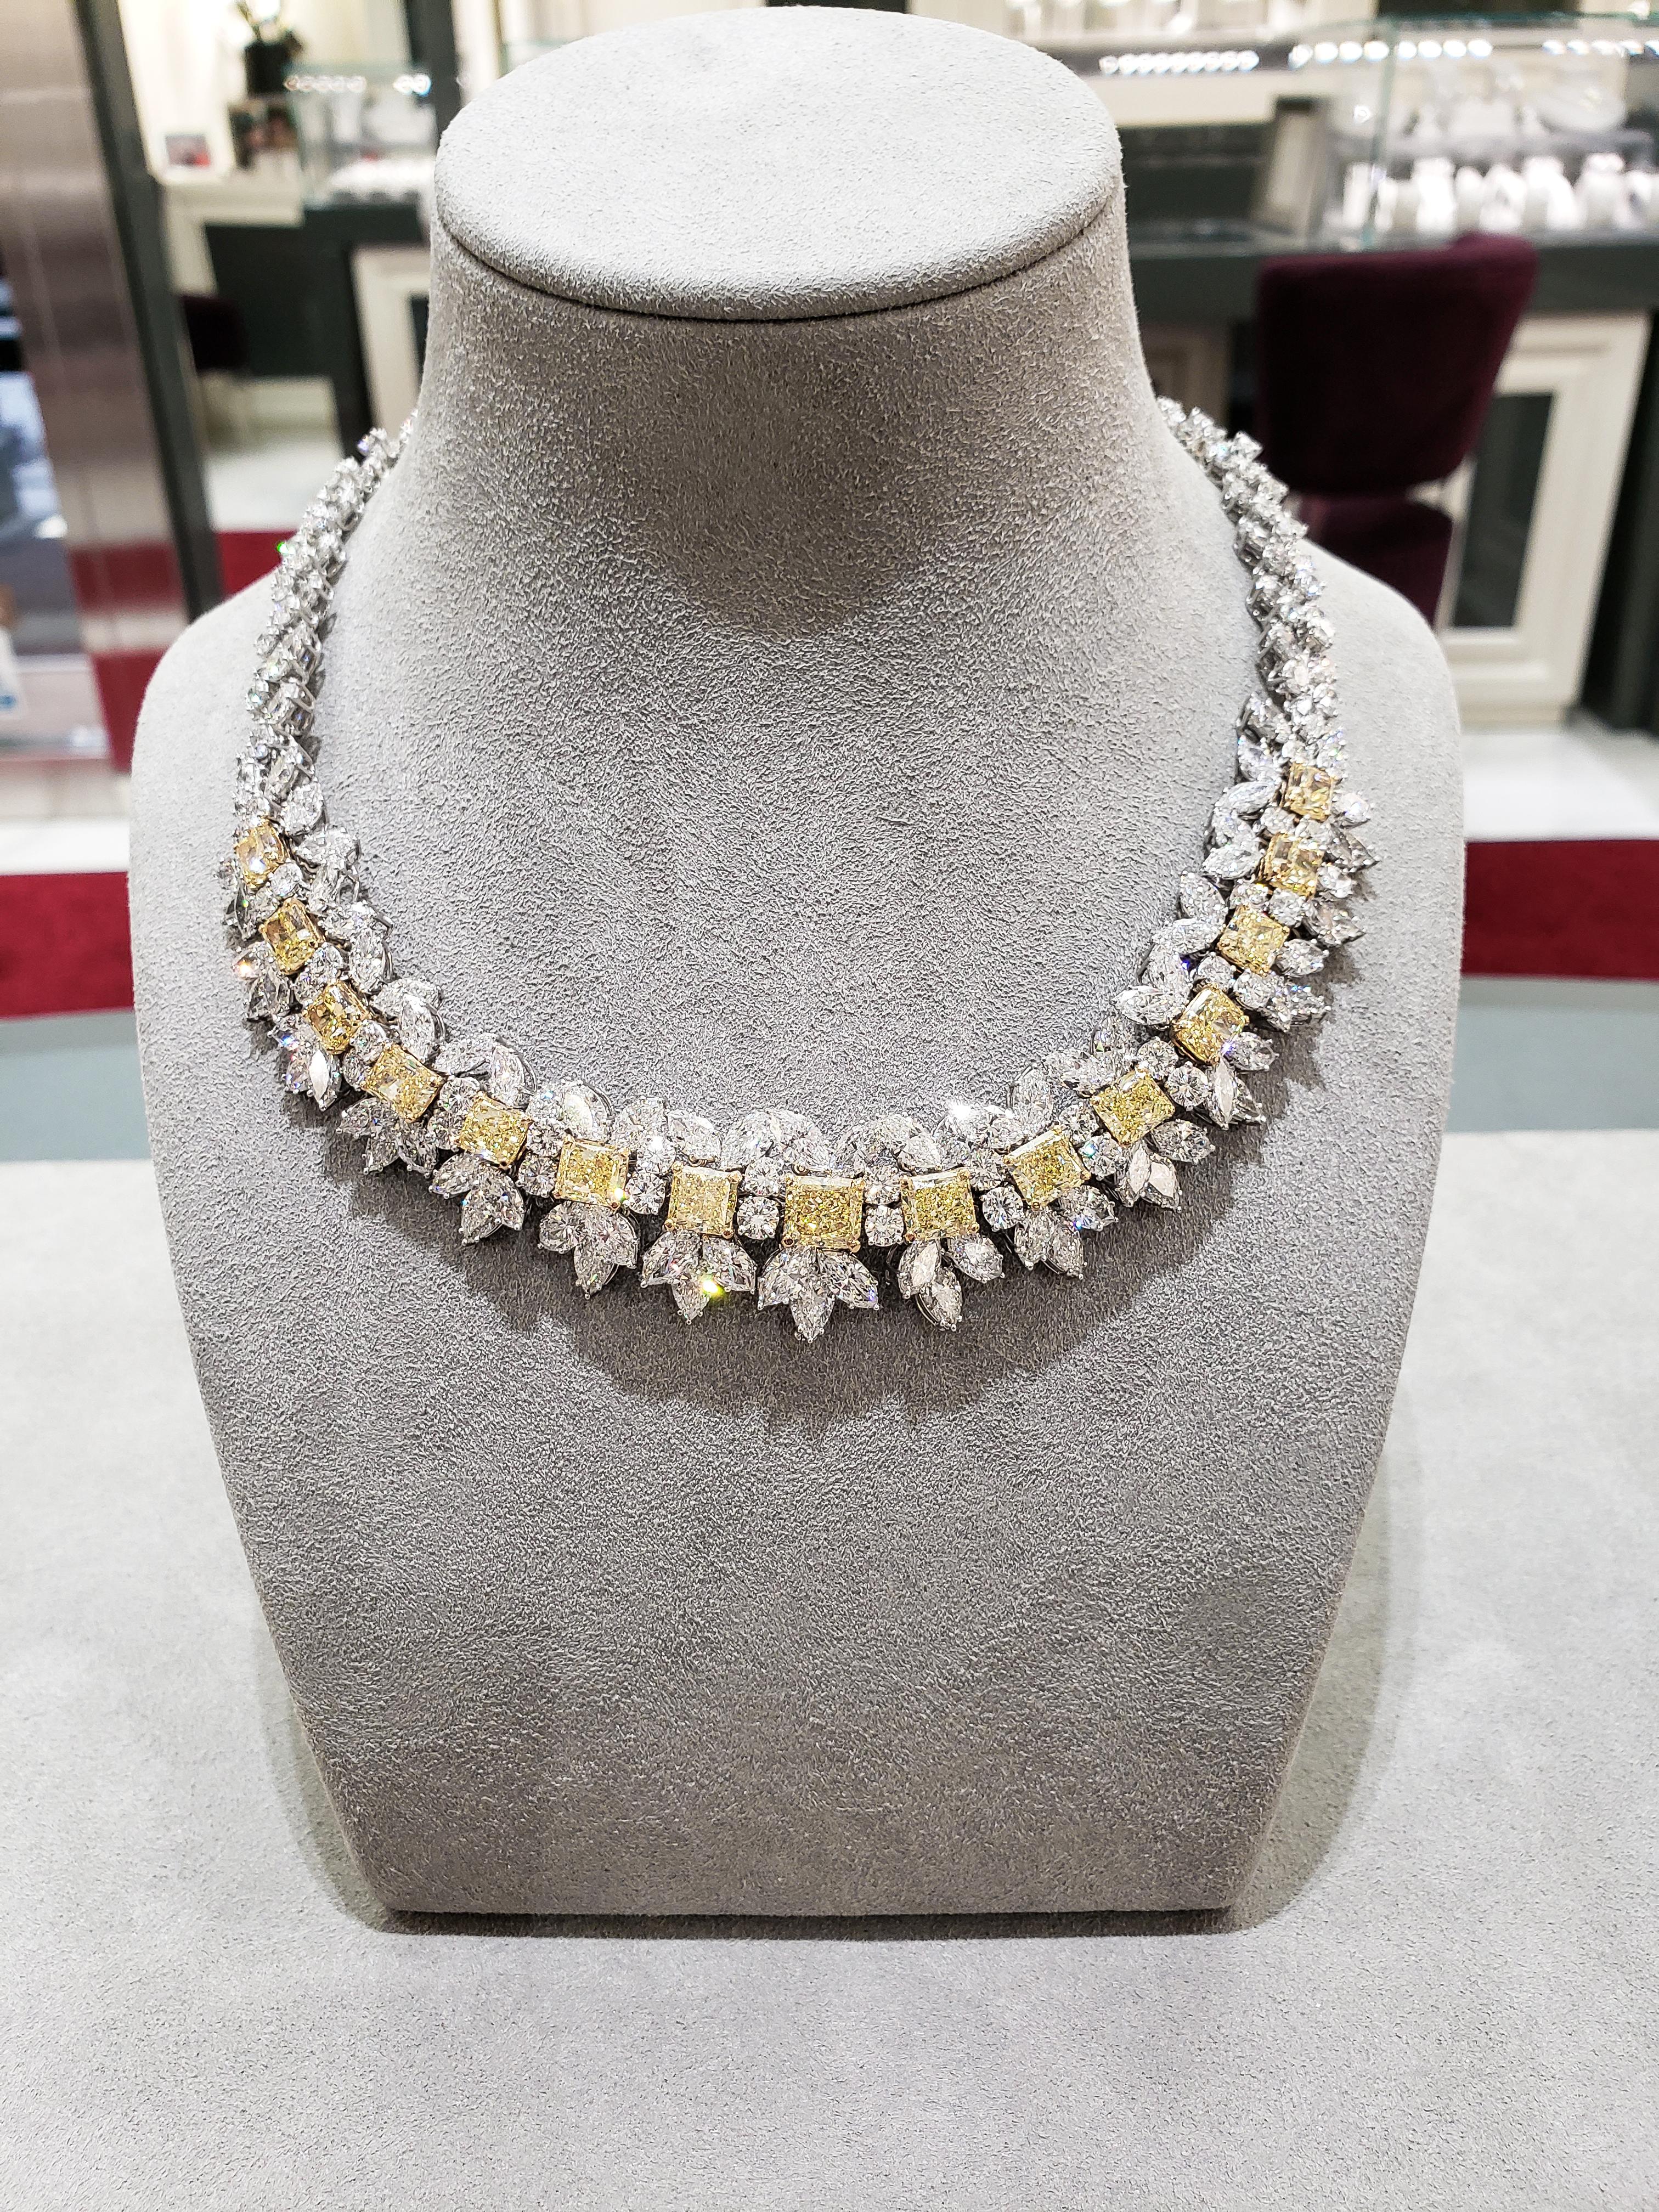 Radiant Cut Roman Malakov GIA Certified 23.45 Carat Total Fancy Intense Yellow Necklace For Sale